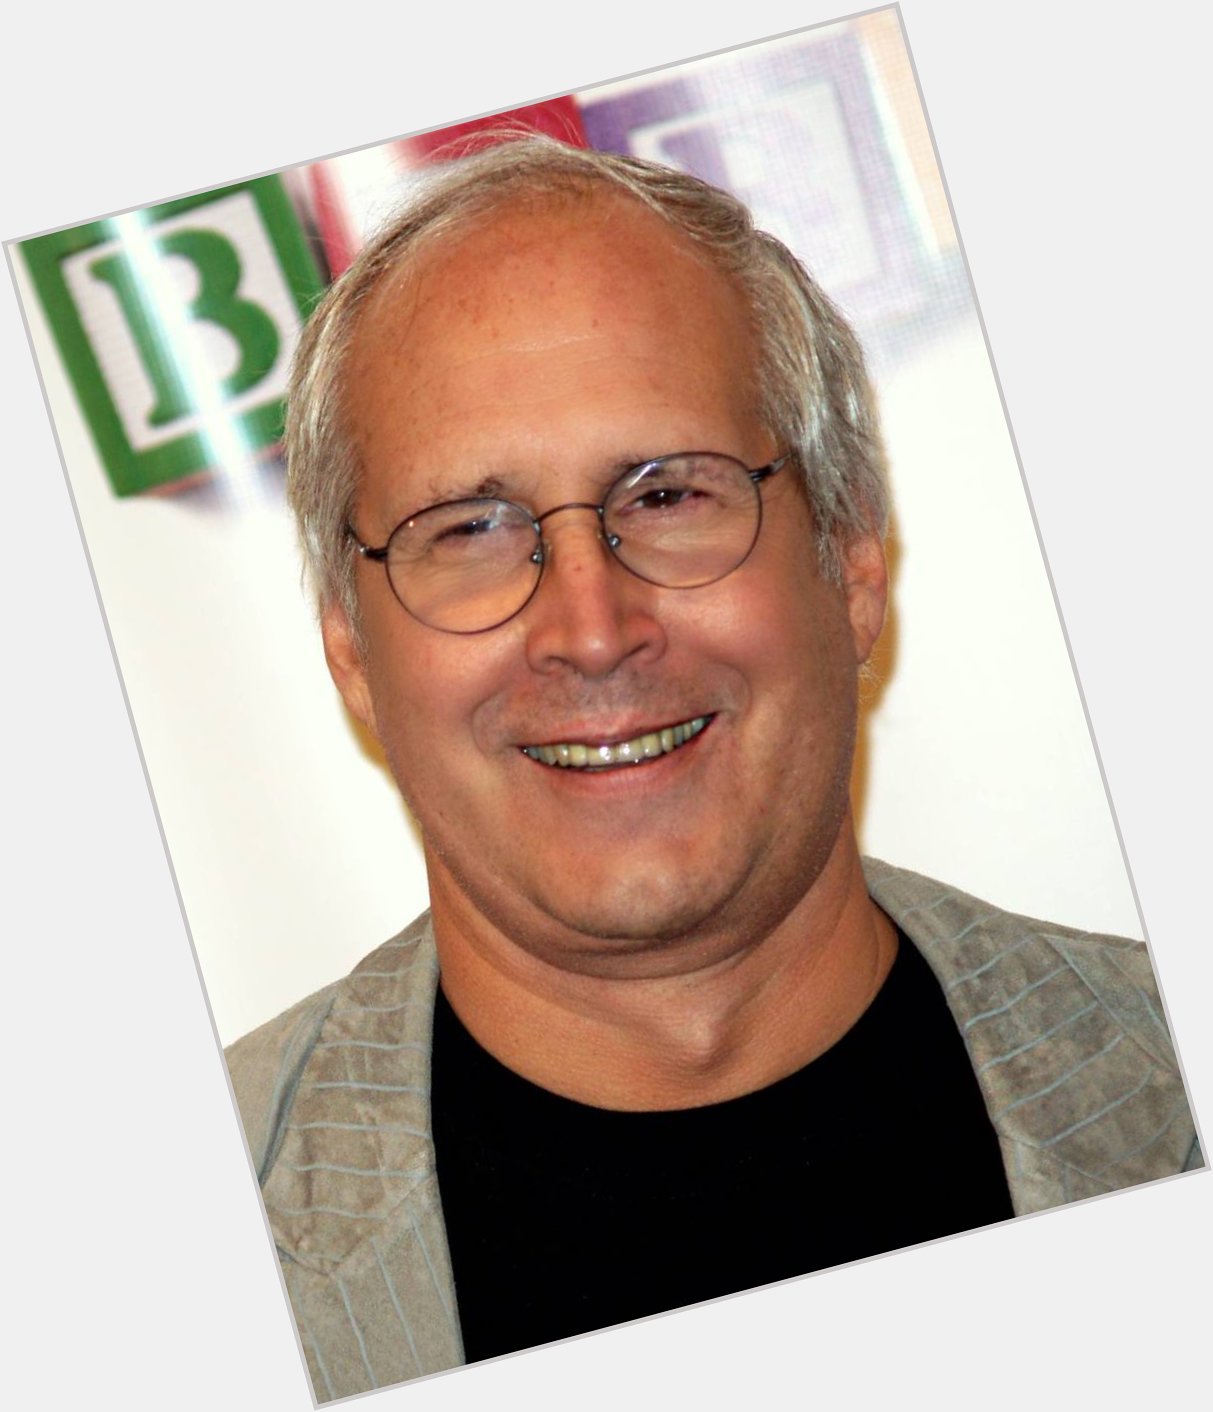 Happy birthday. He\s Chevy Chase and you\re not 